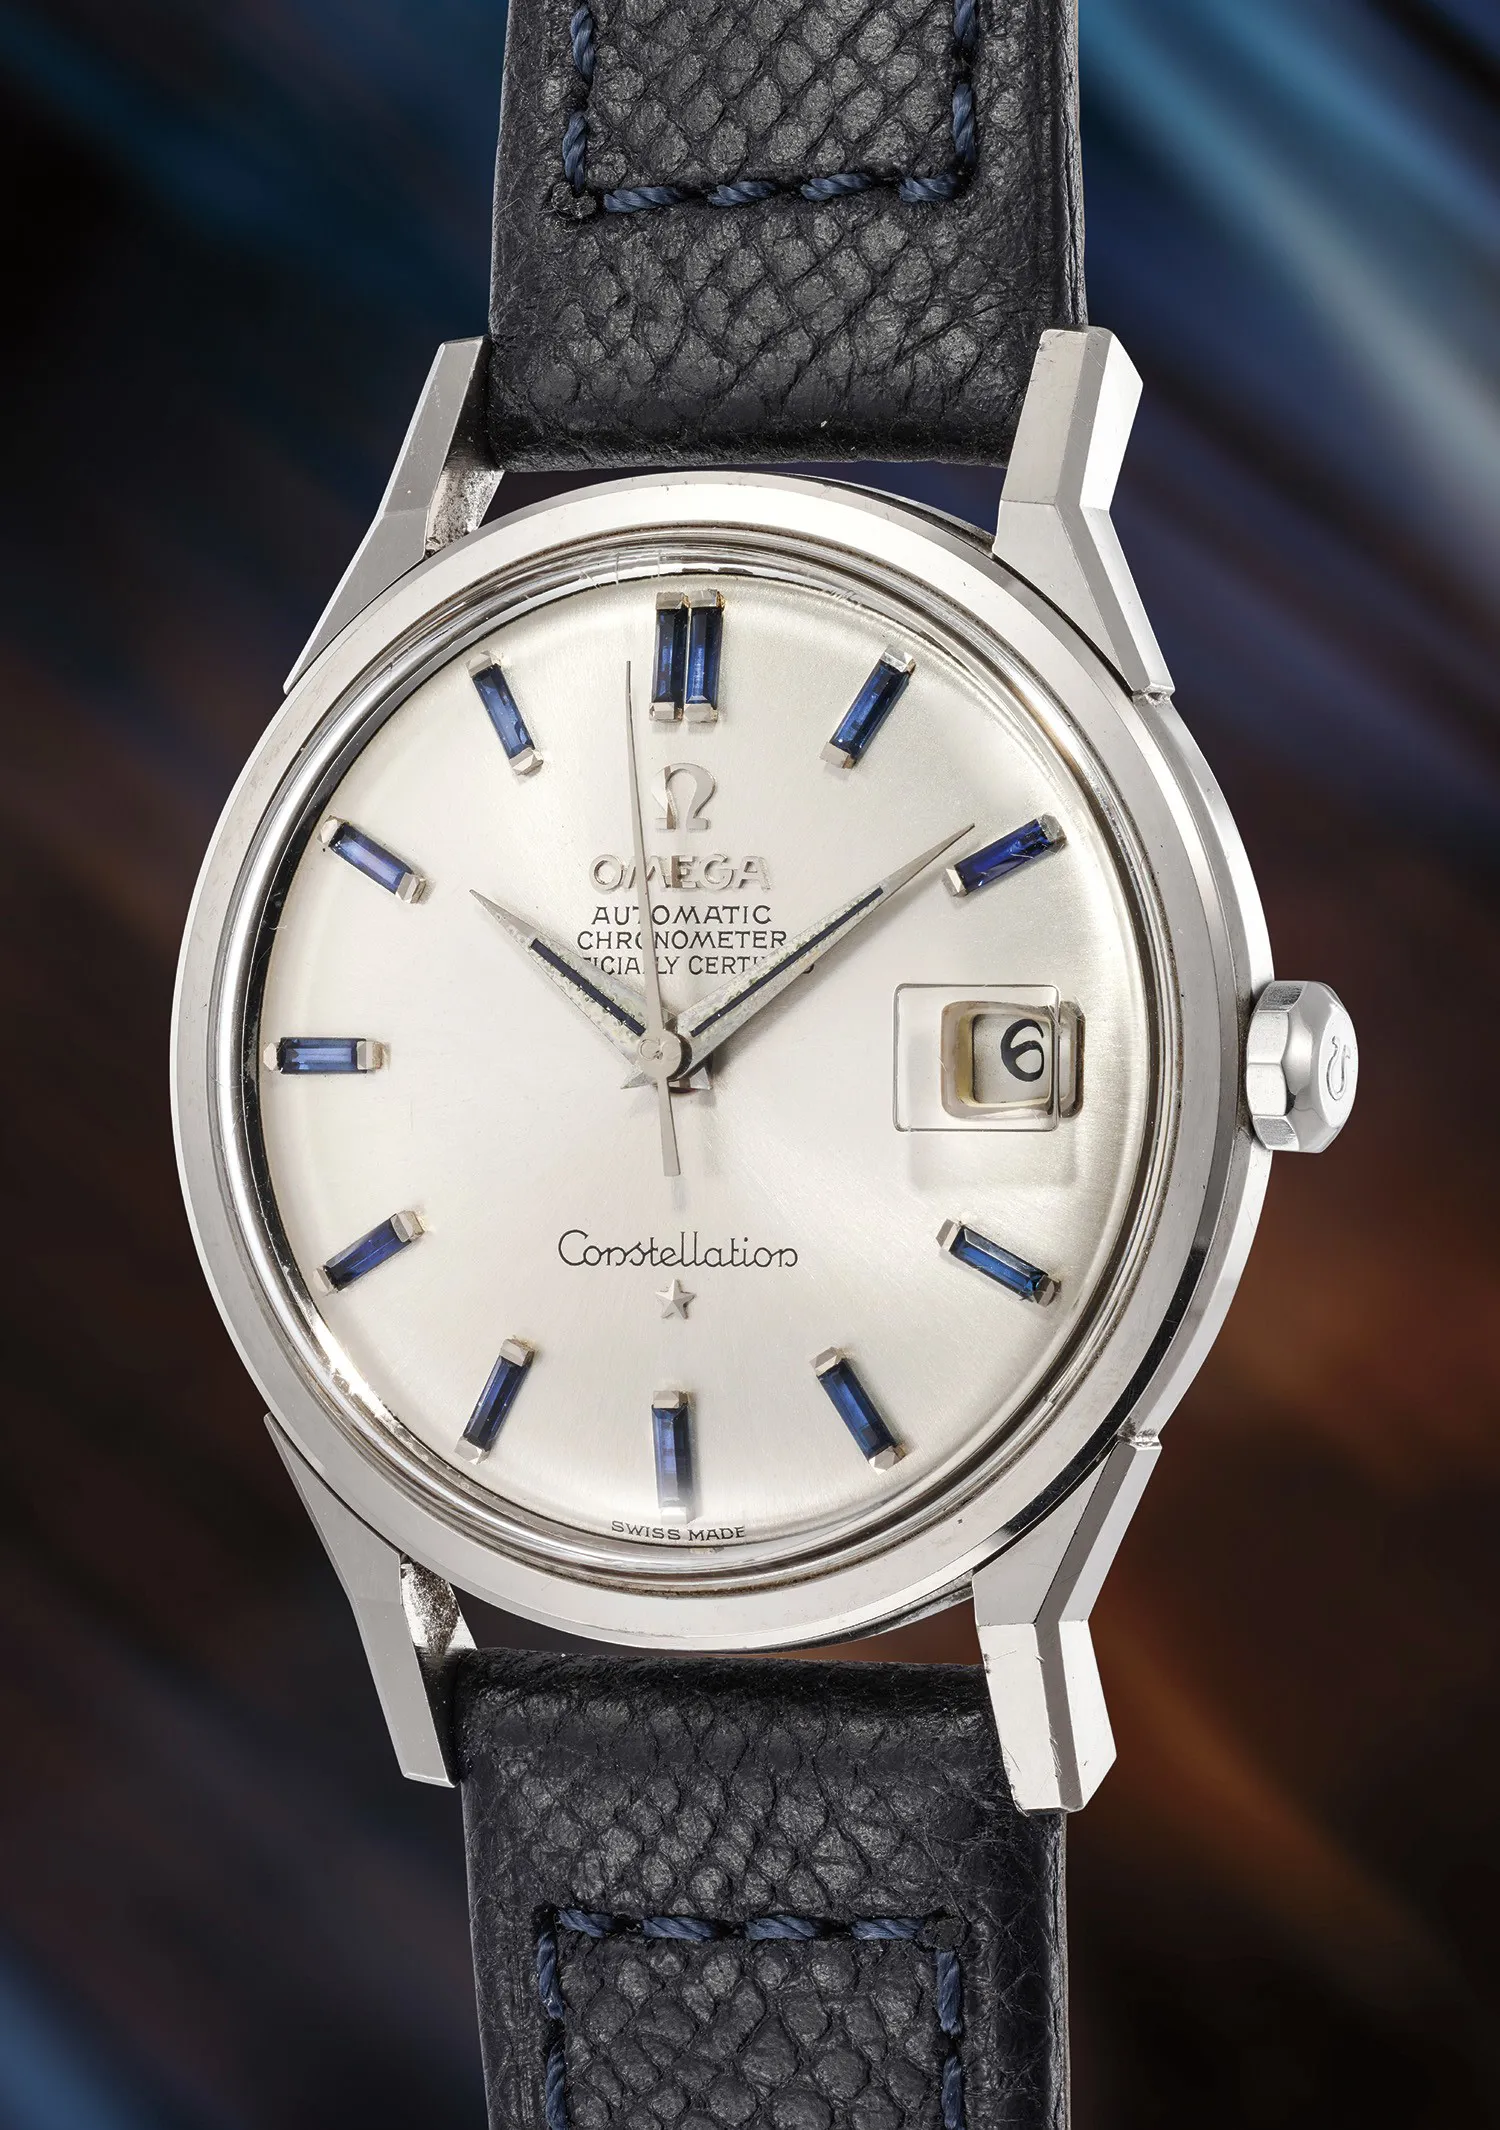 Omega Constellation “De Luxe” 168005/6 34.5mm White gold